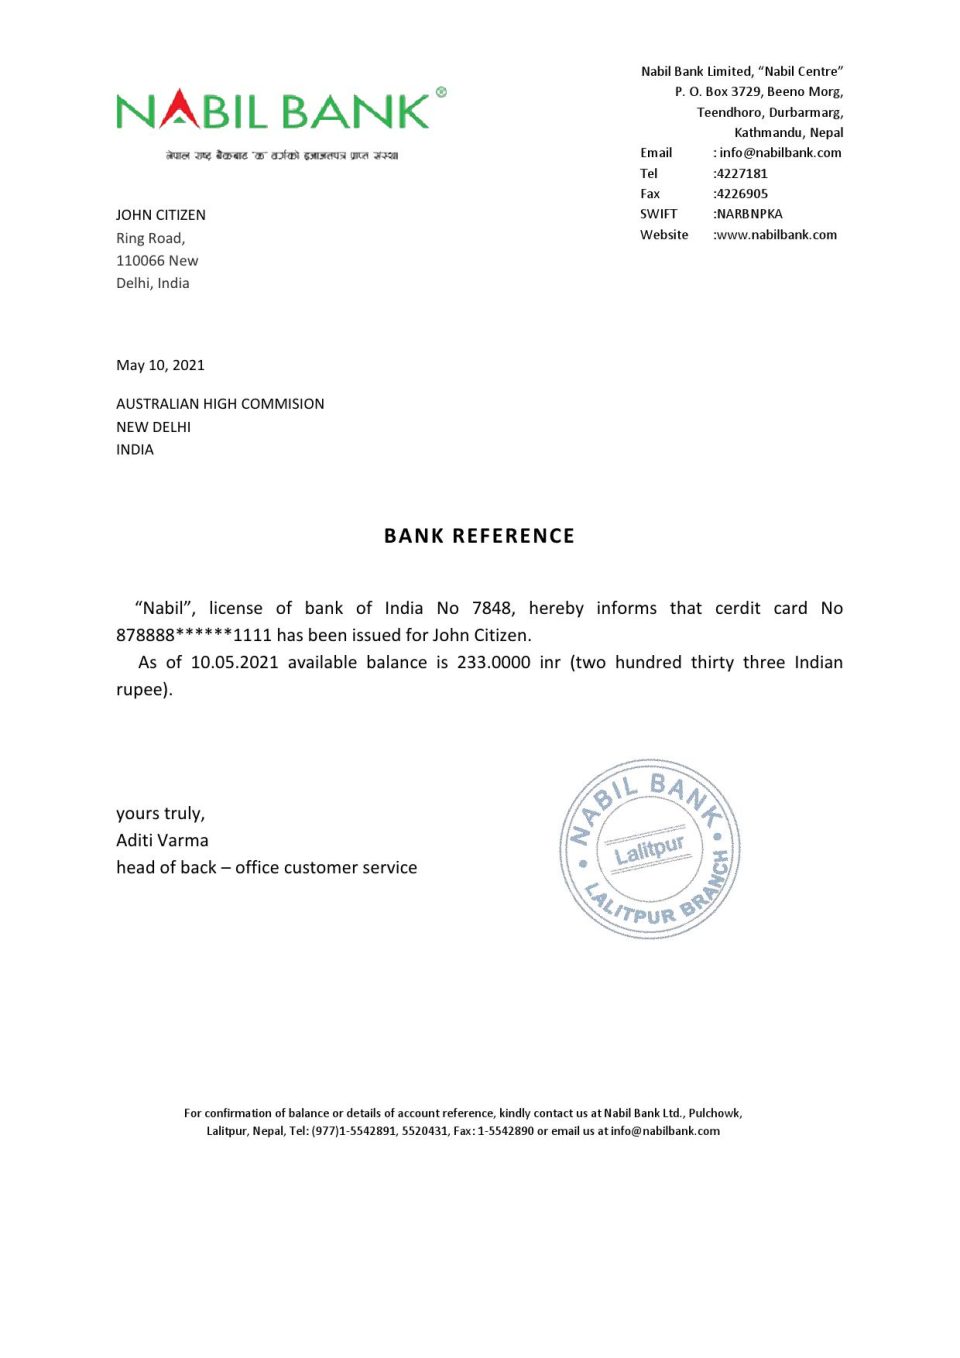 Download India Nabil Bank Reference Letter Templates | Editable Word